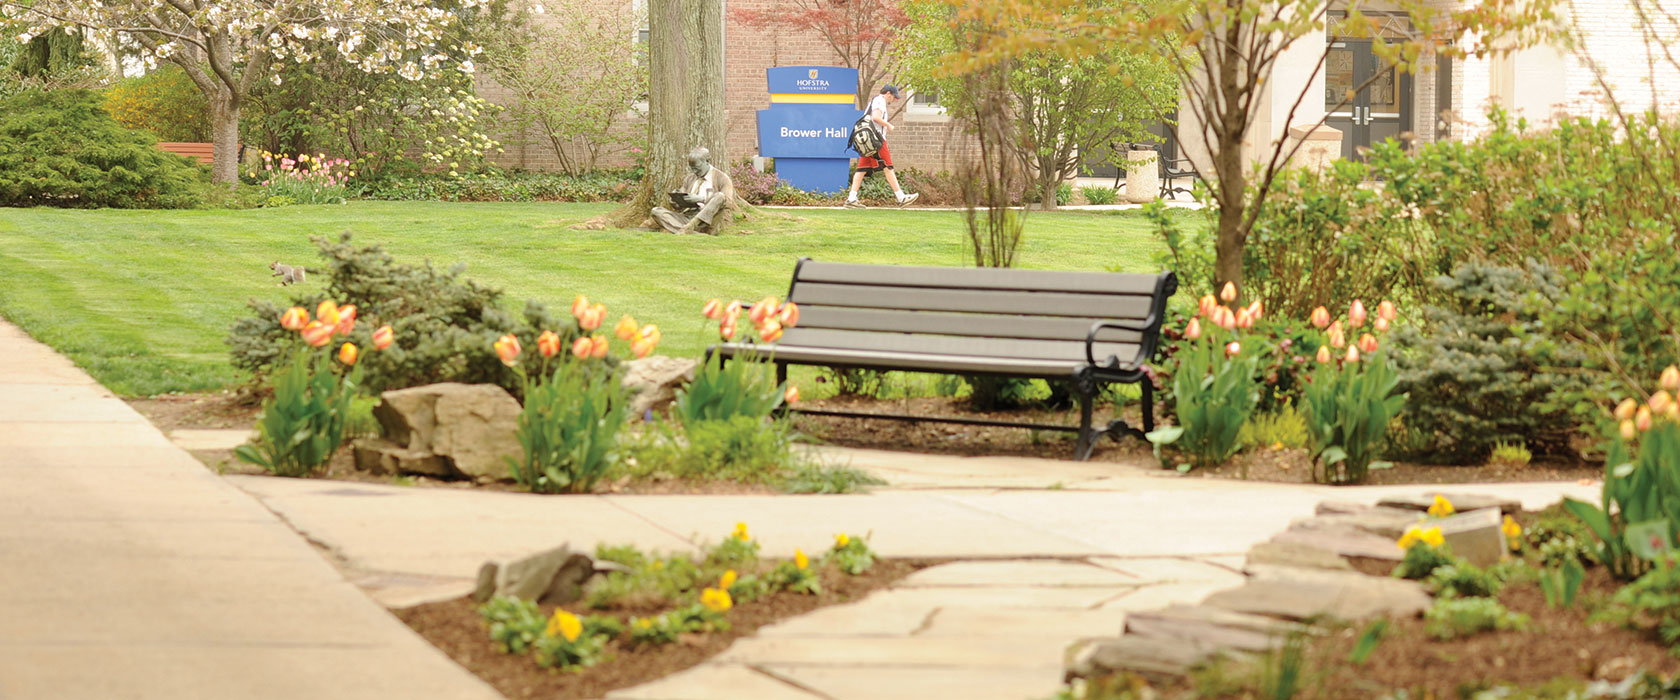 A view of a bench on the Hofstra Campus